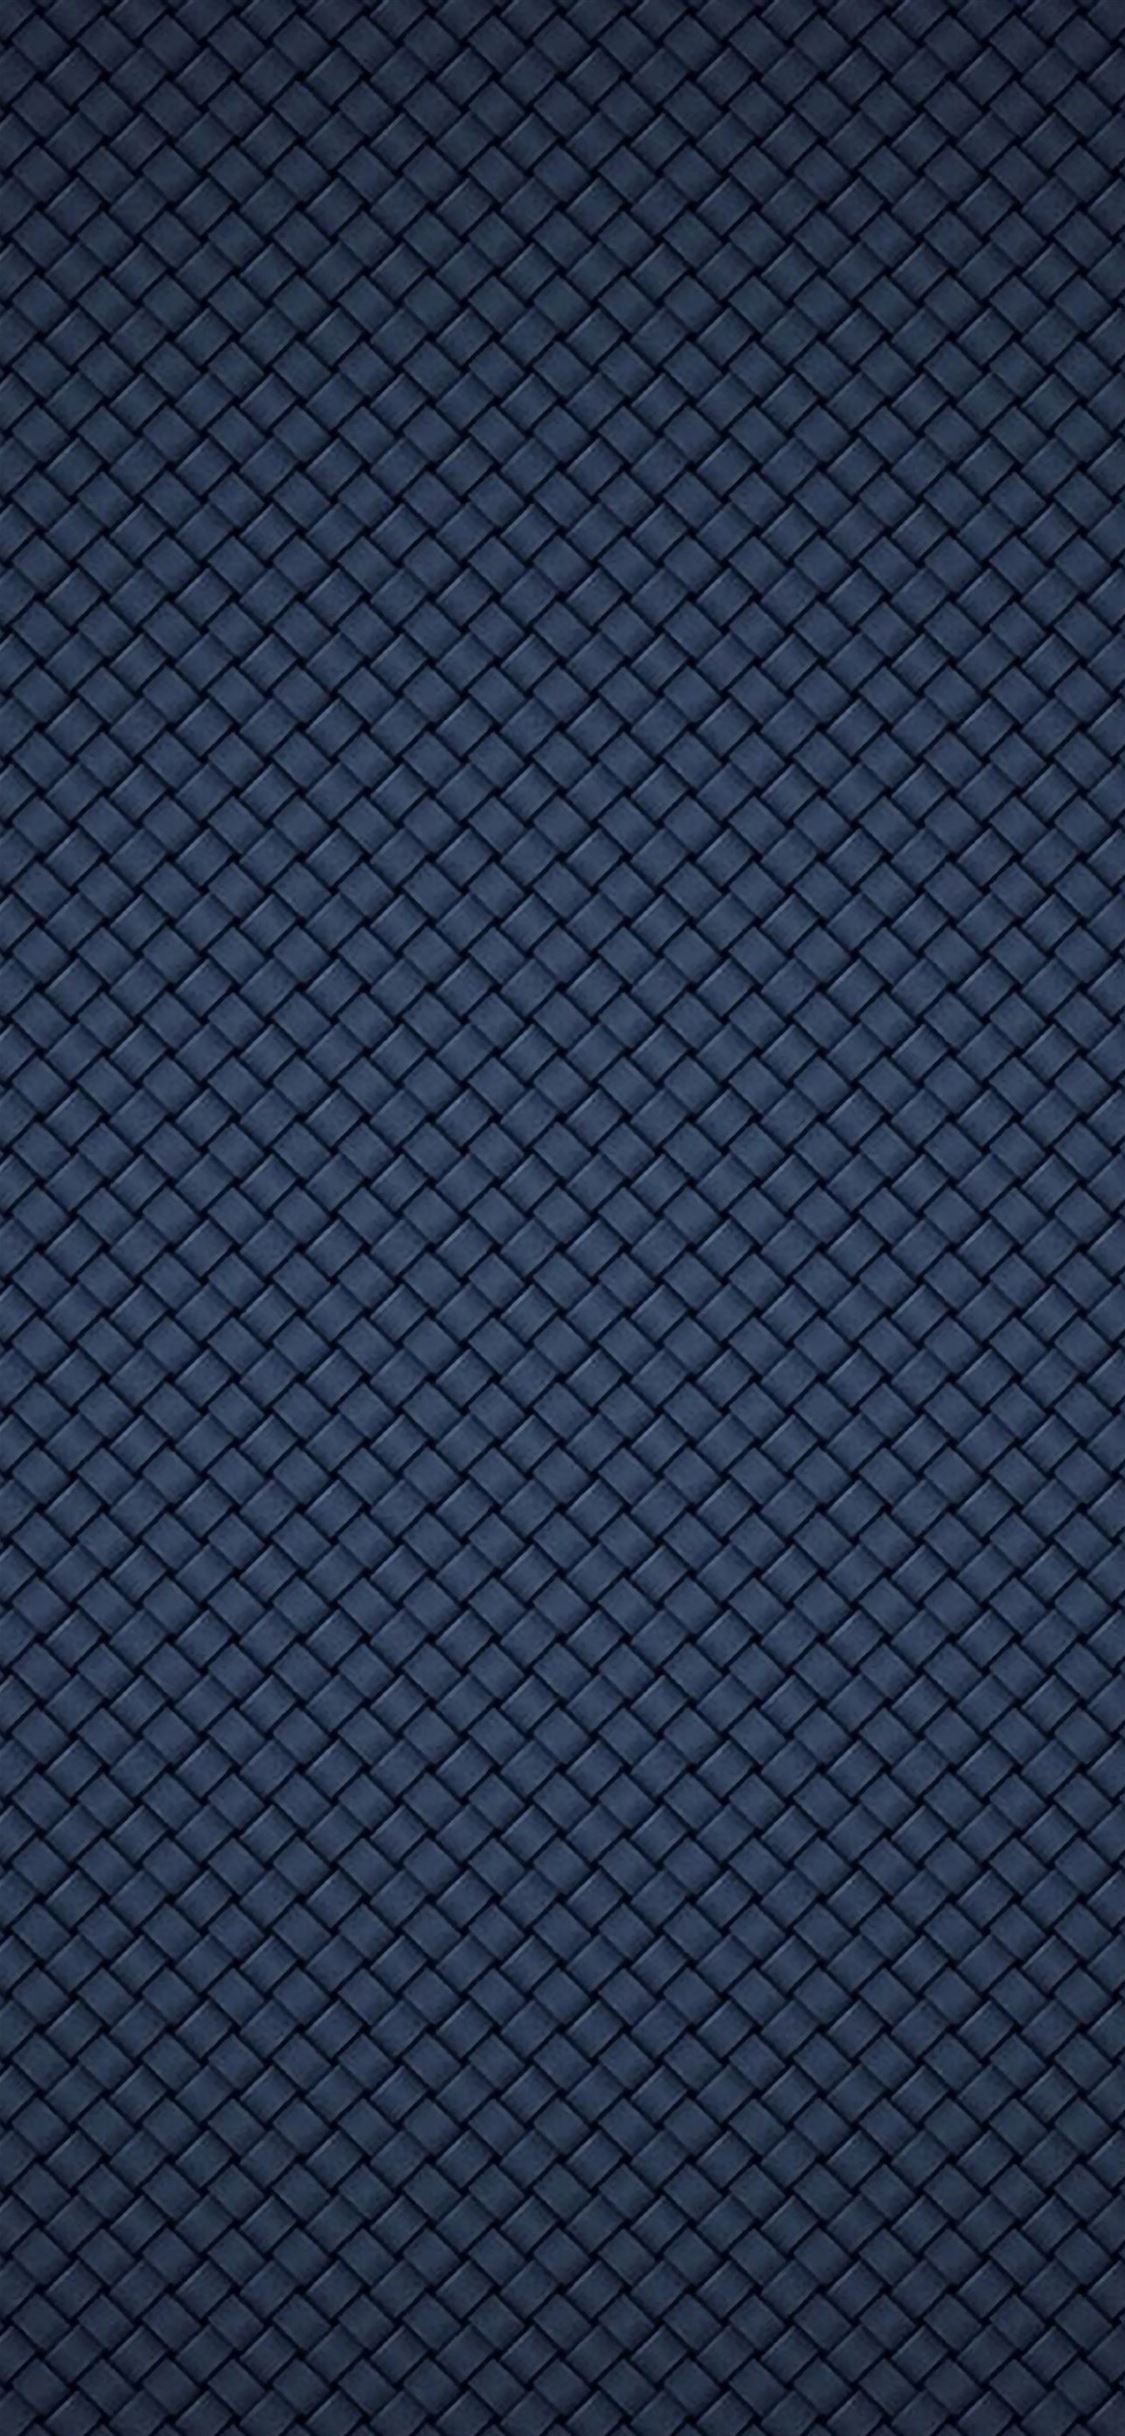 Blue background iPhone wallpaper 